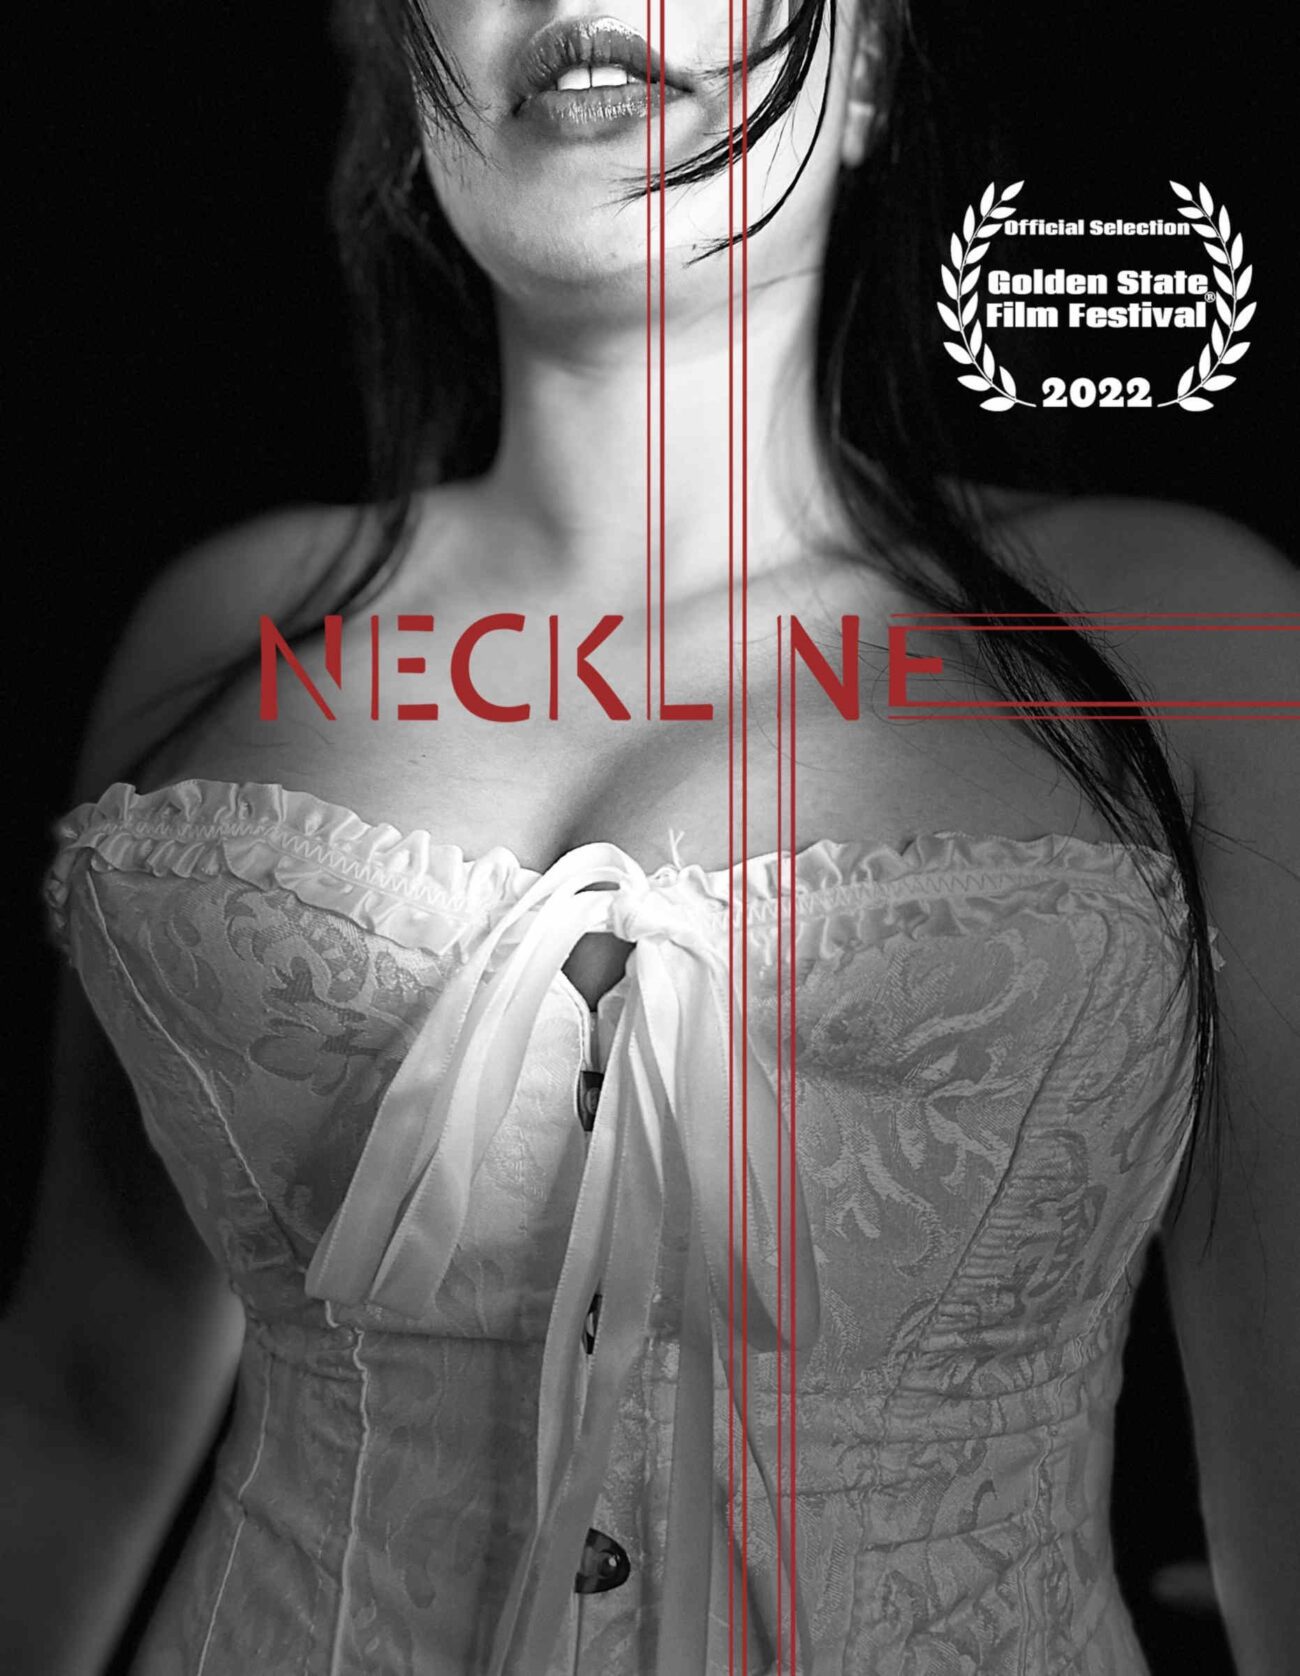 Actress Likun Jing's latest short film 'Neck/line' has a lot to say when it comes to representation. Tune into her message for international women!